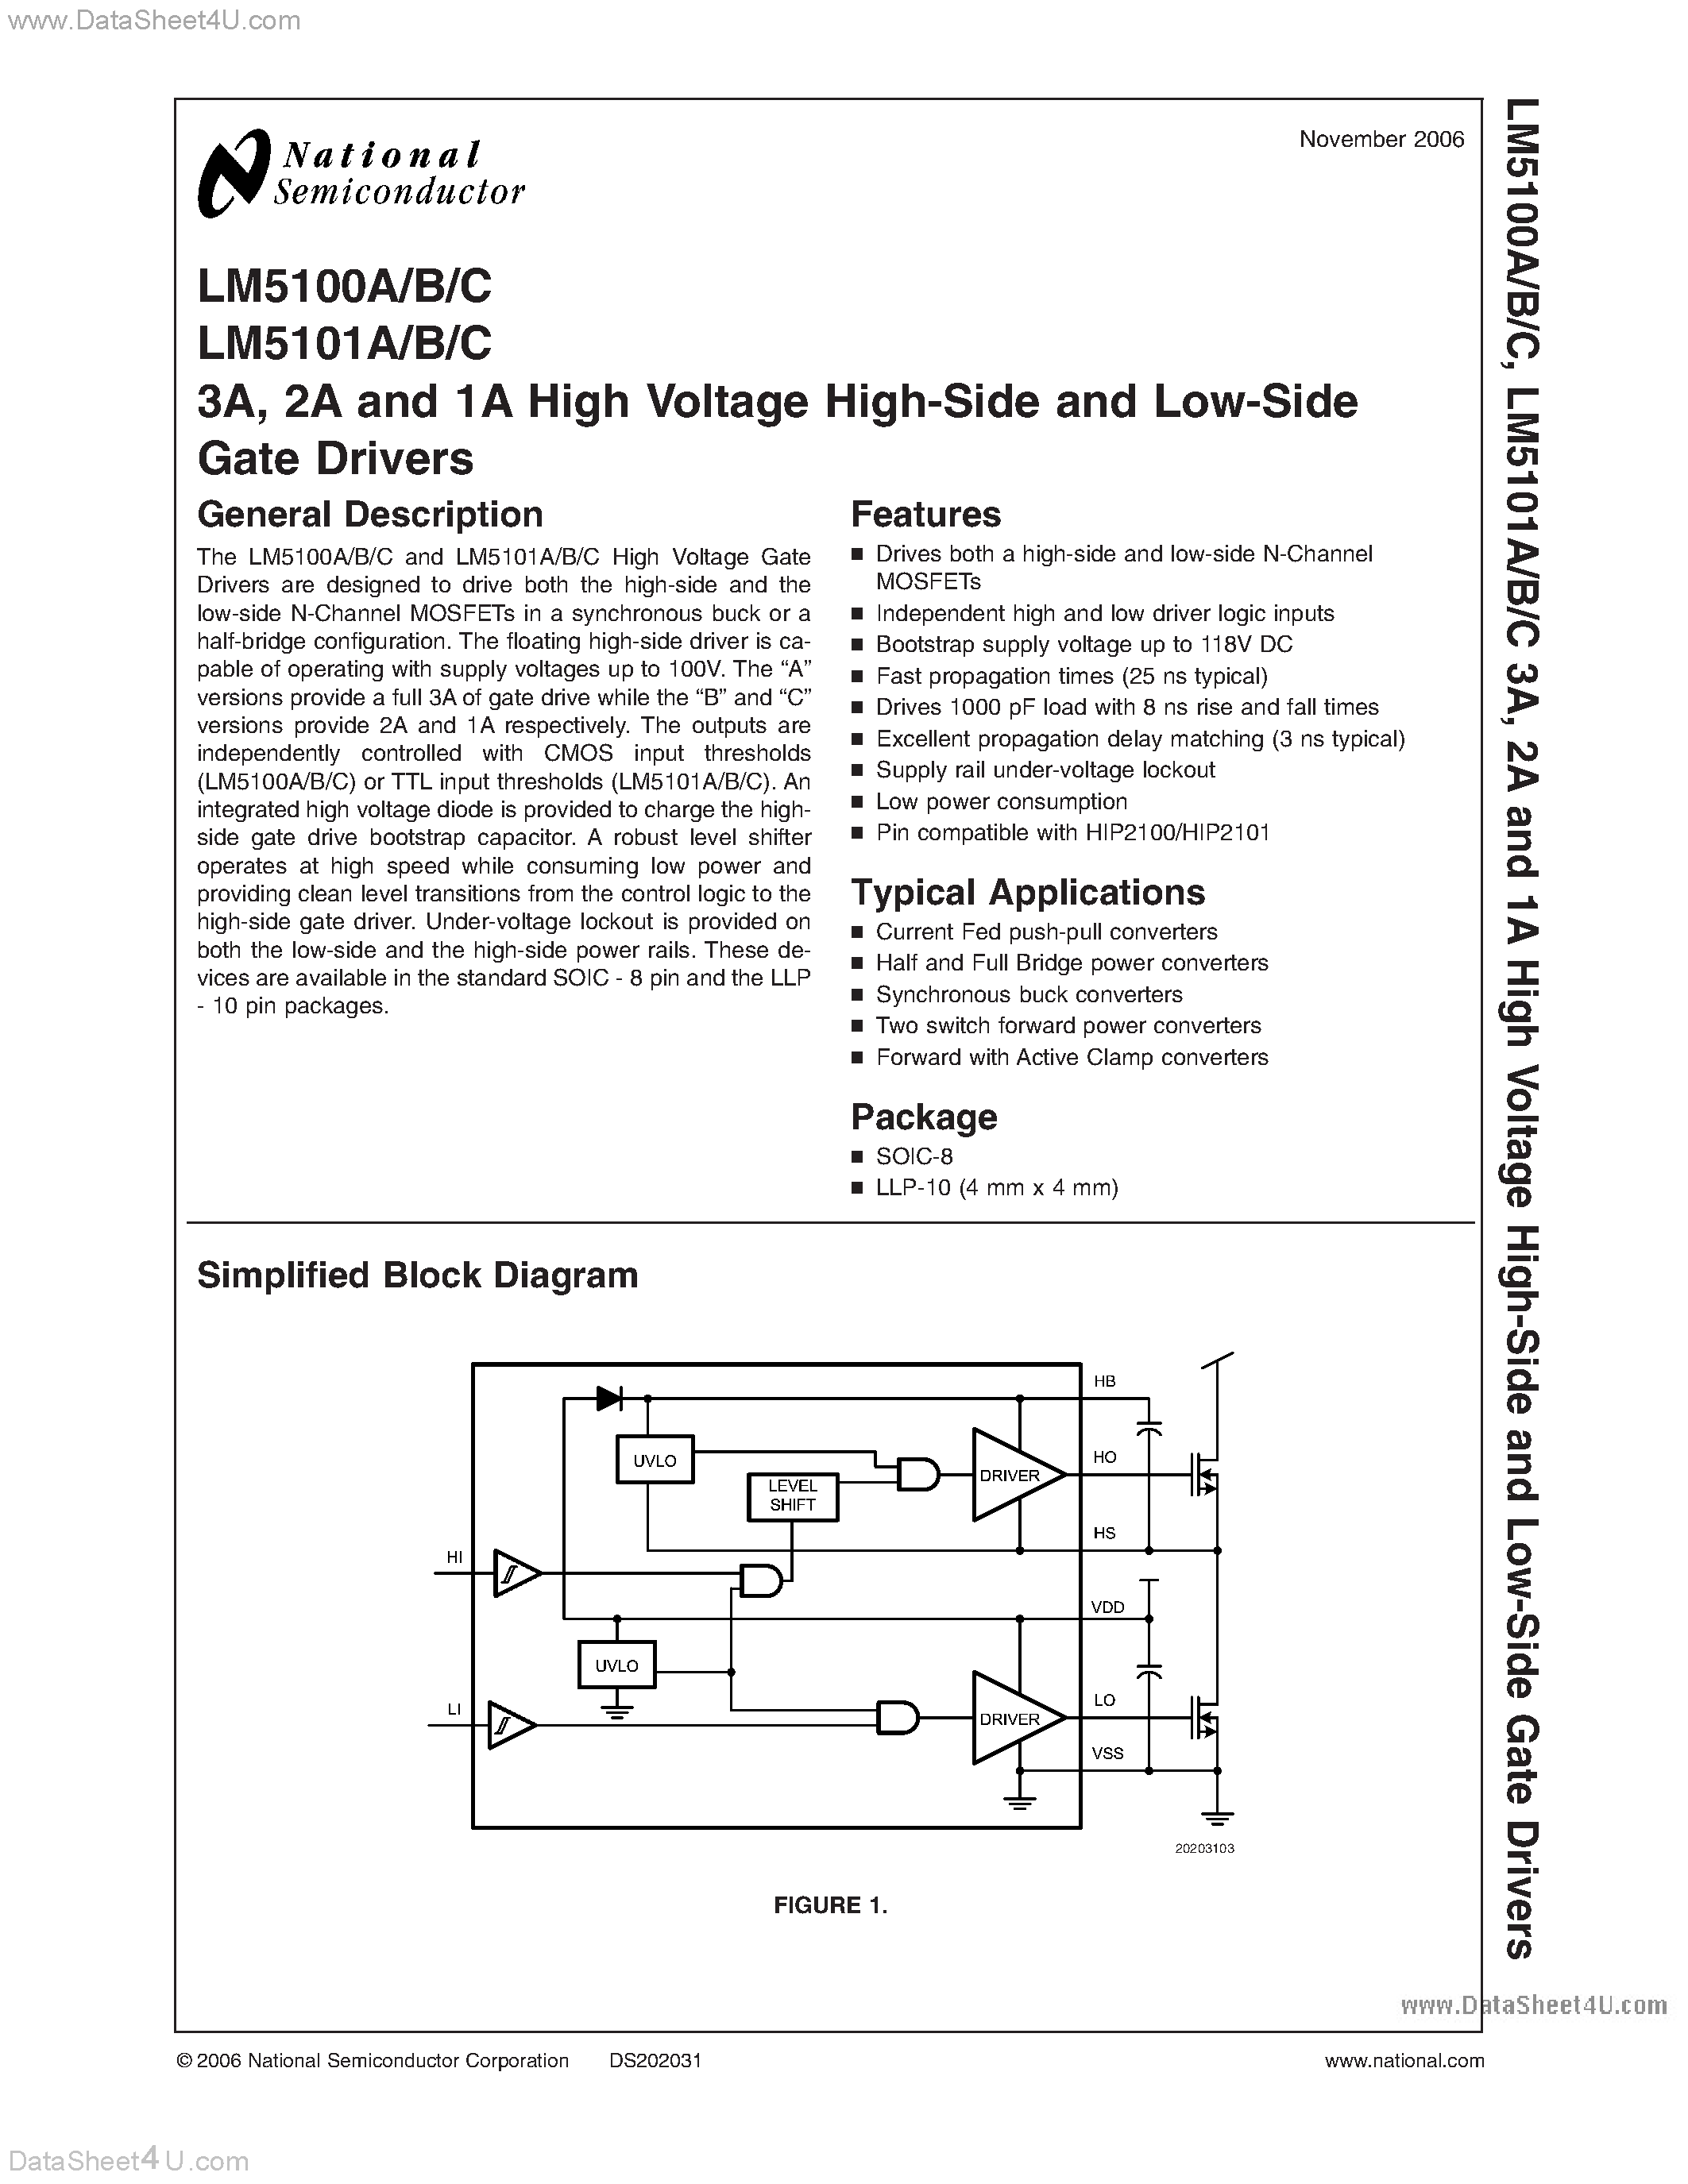 Datasheet LM5100A - (LM5100x / LM5101x) High Voltage High Side and Low Side Gate Drivers page 1